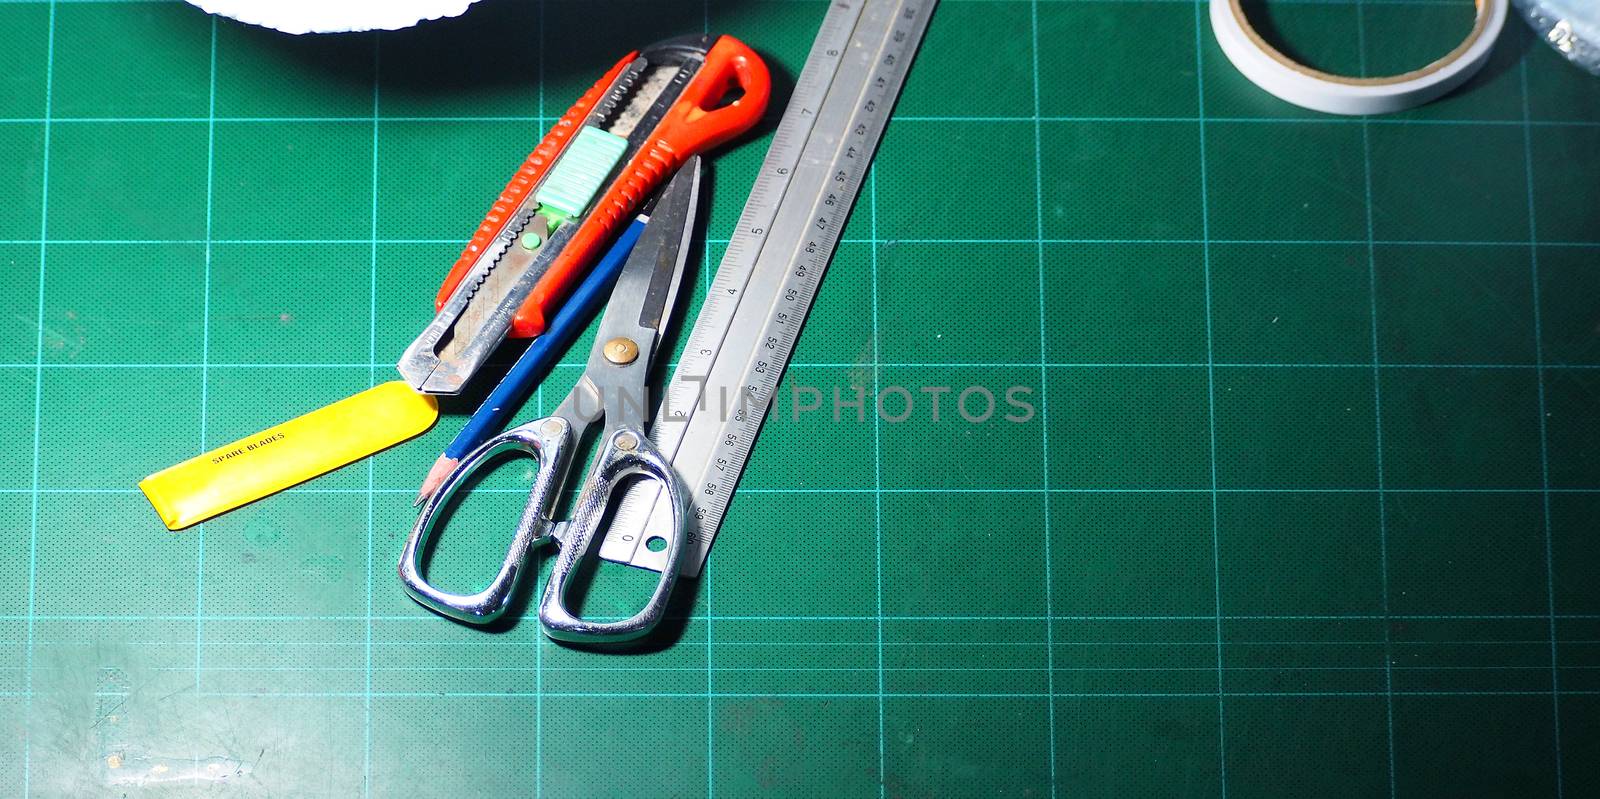 Scissor and cutter and ruler and pencil and blades on the green cutting mat and top view angle camera.